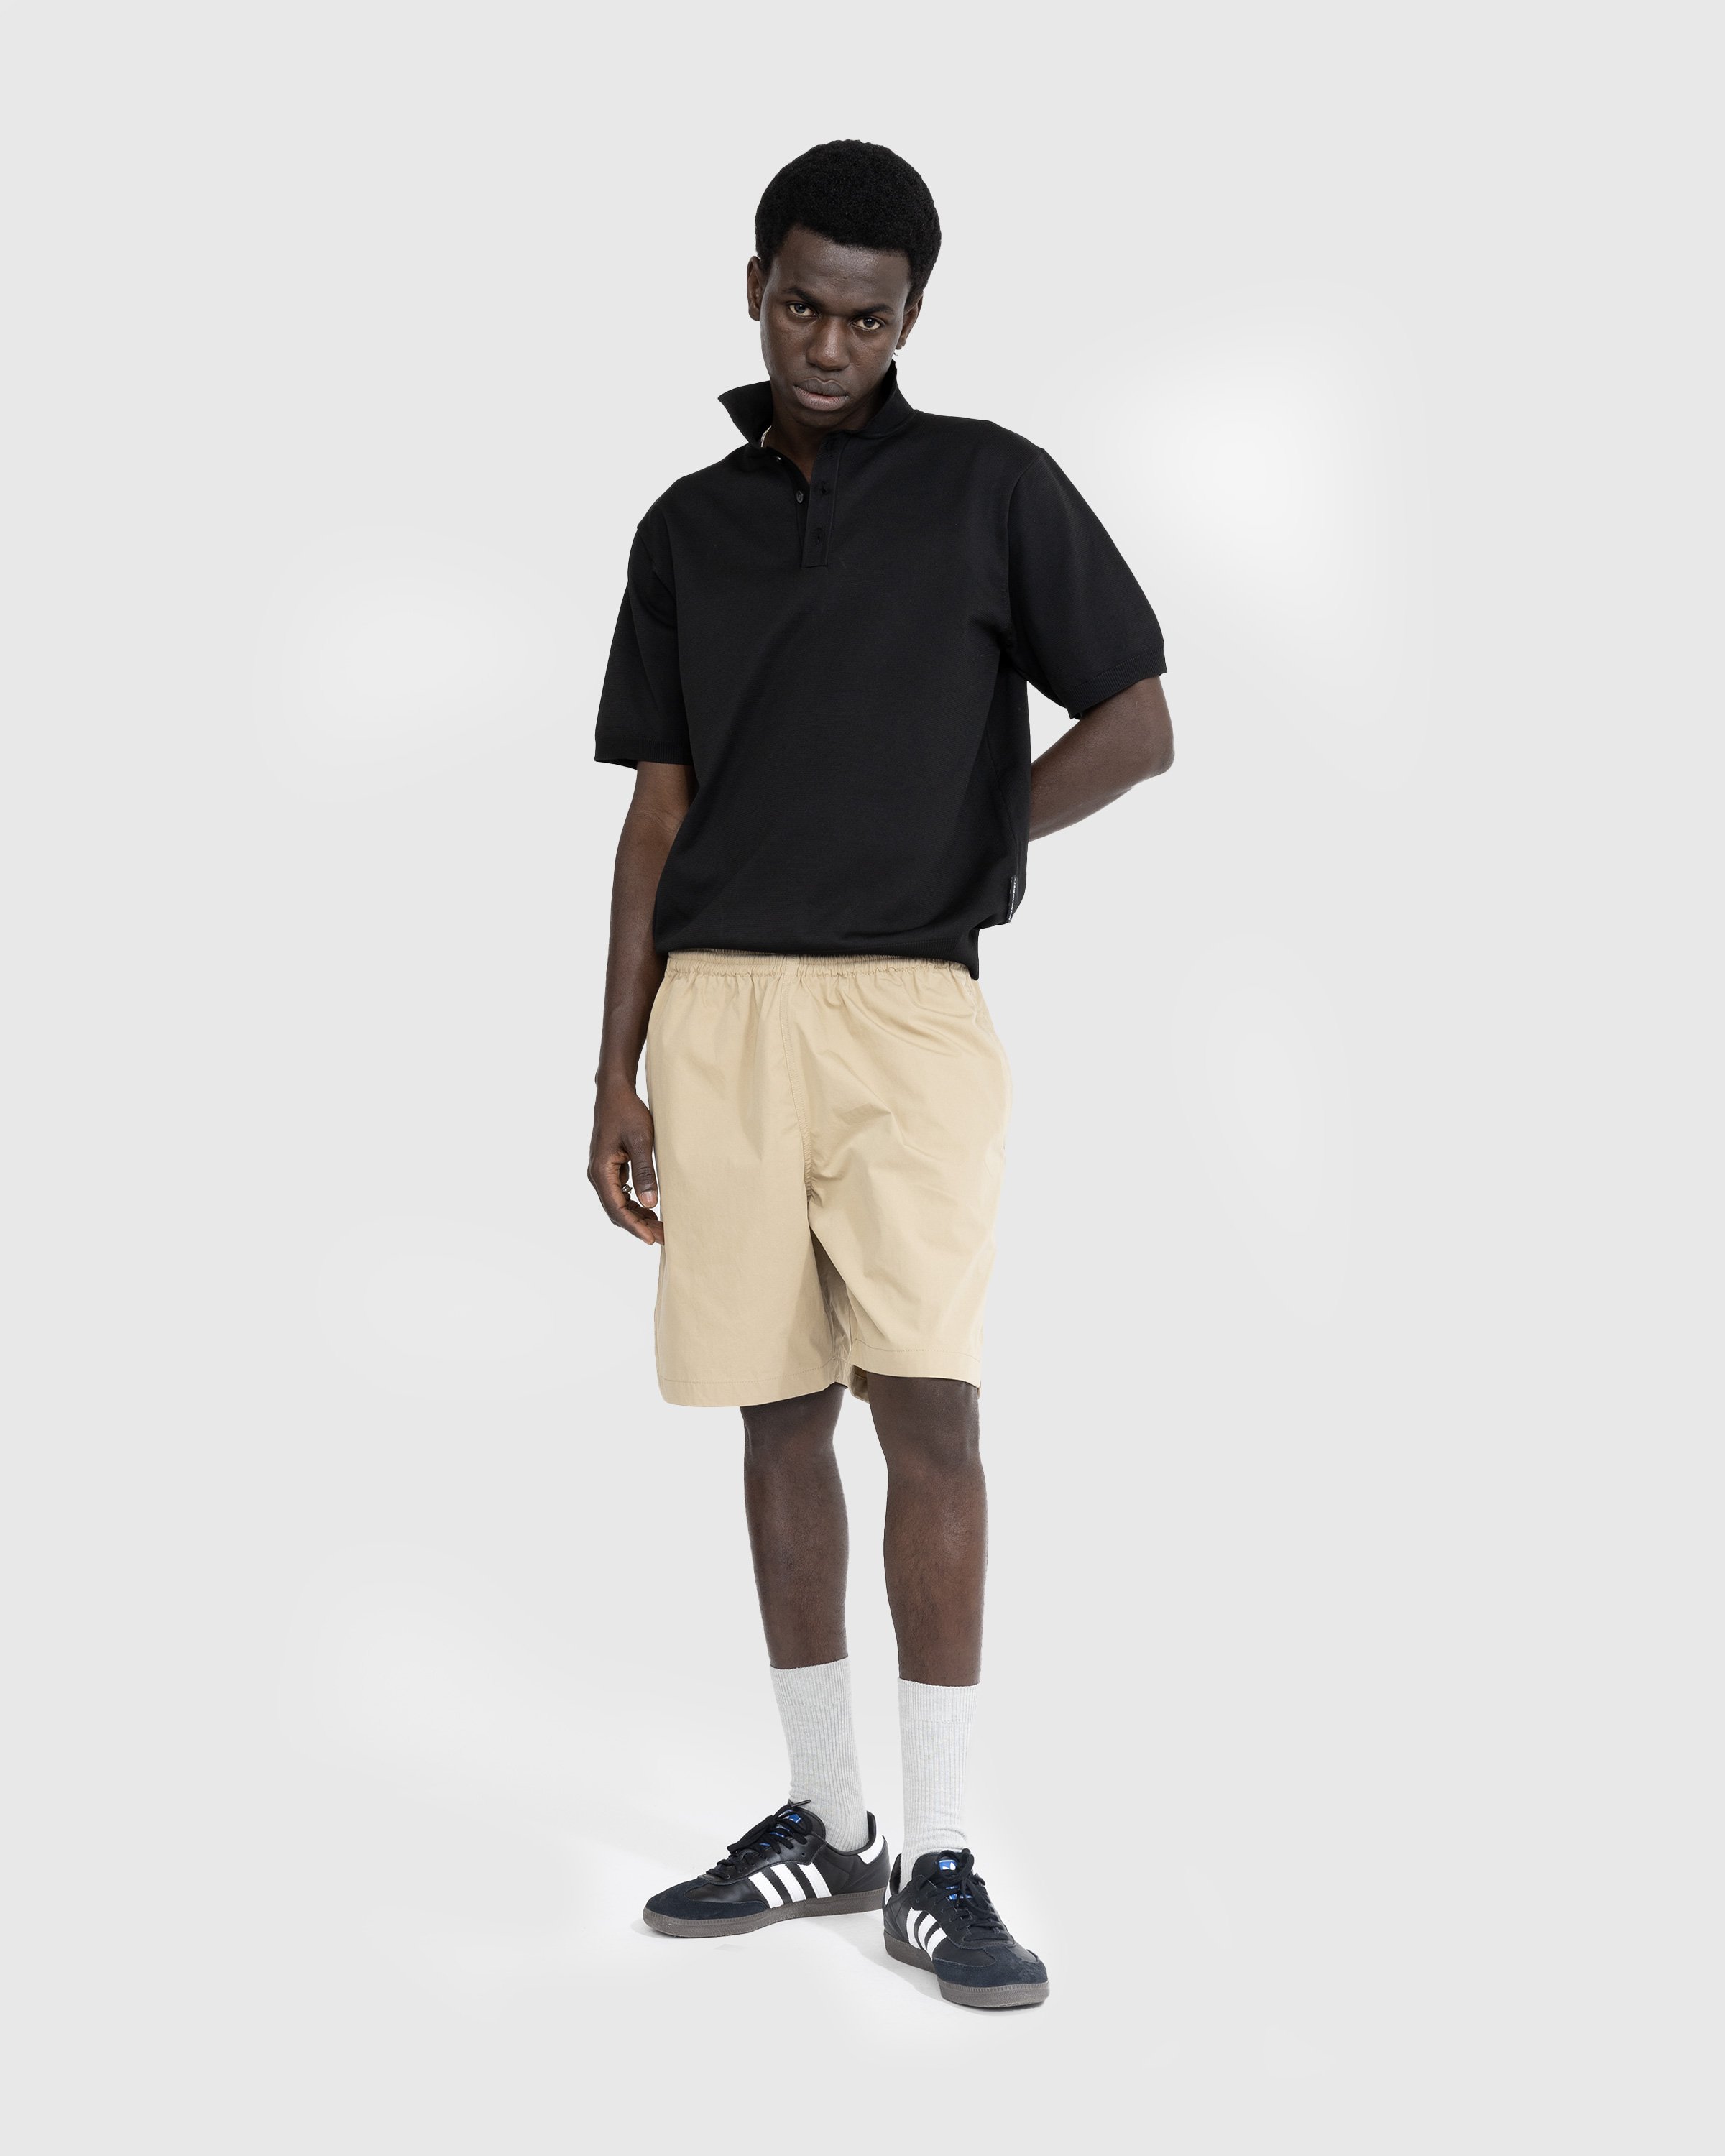 Highsnobiety HS05 - Poly SS Knit Polo - Clothing - Black - Image 6